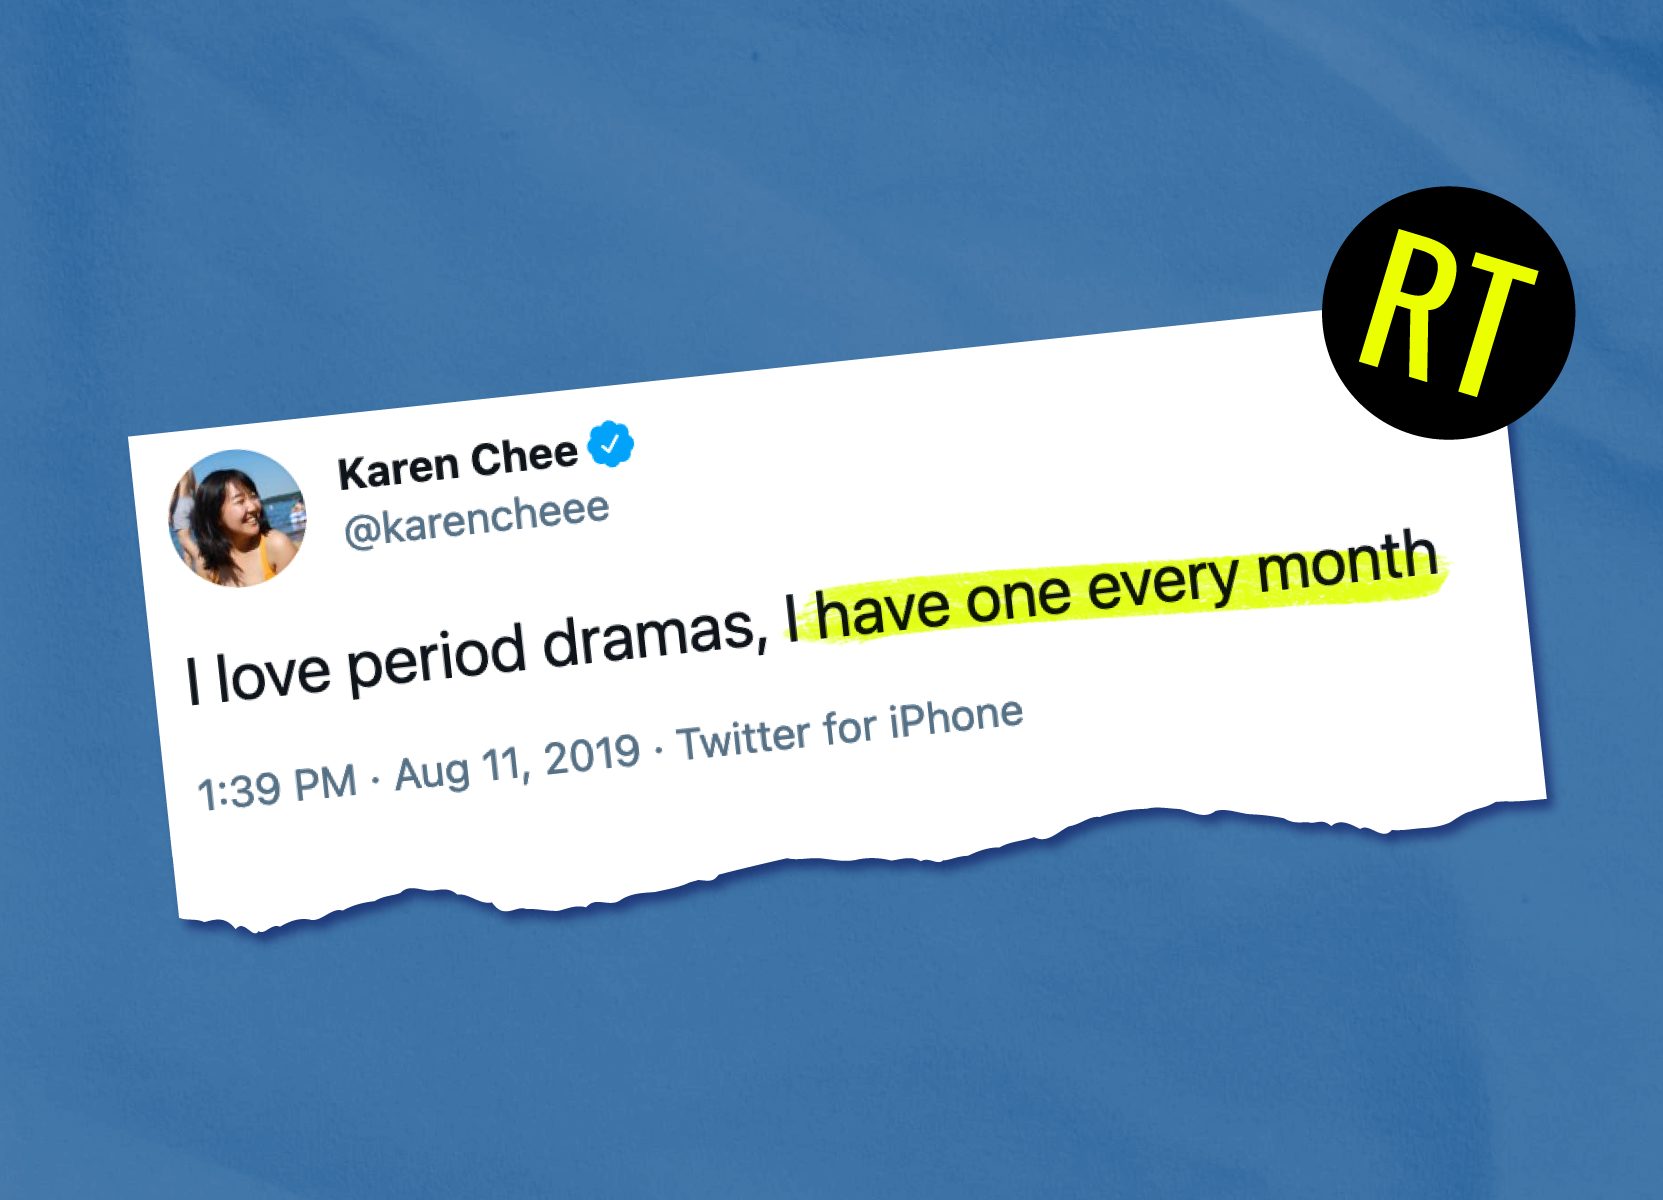 11 seriously relatable Tweets & TikToks about periods